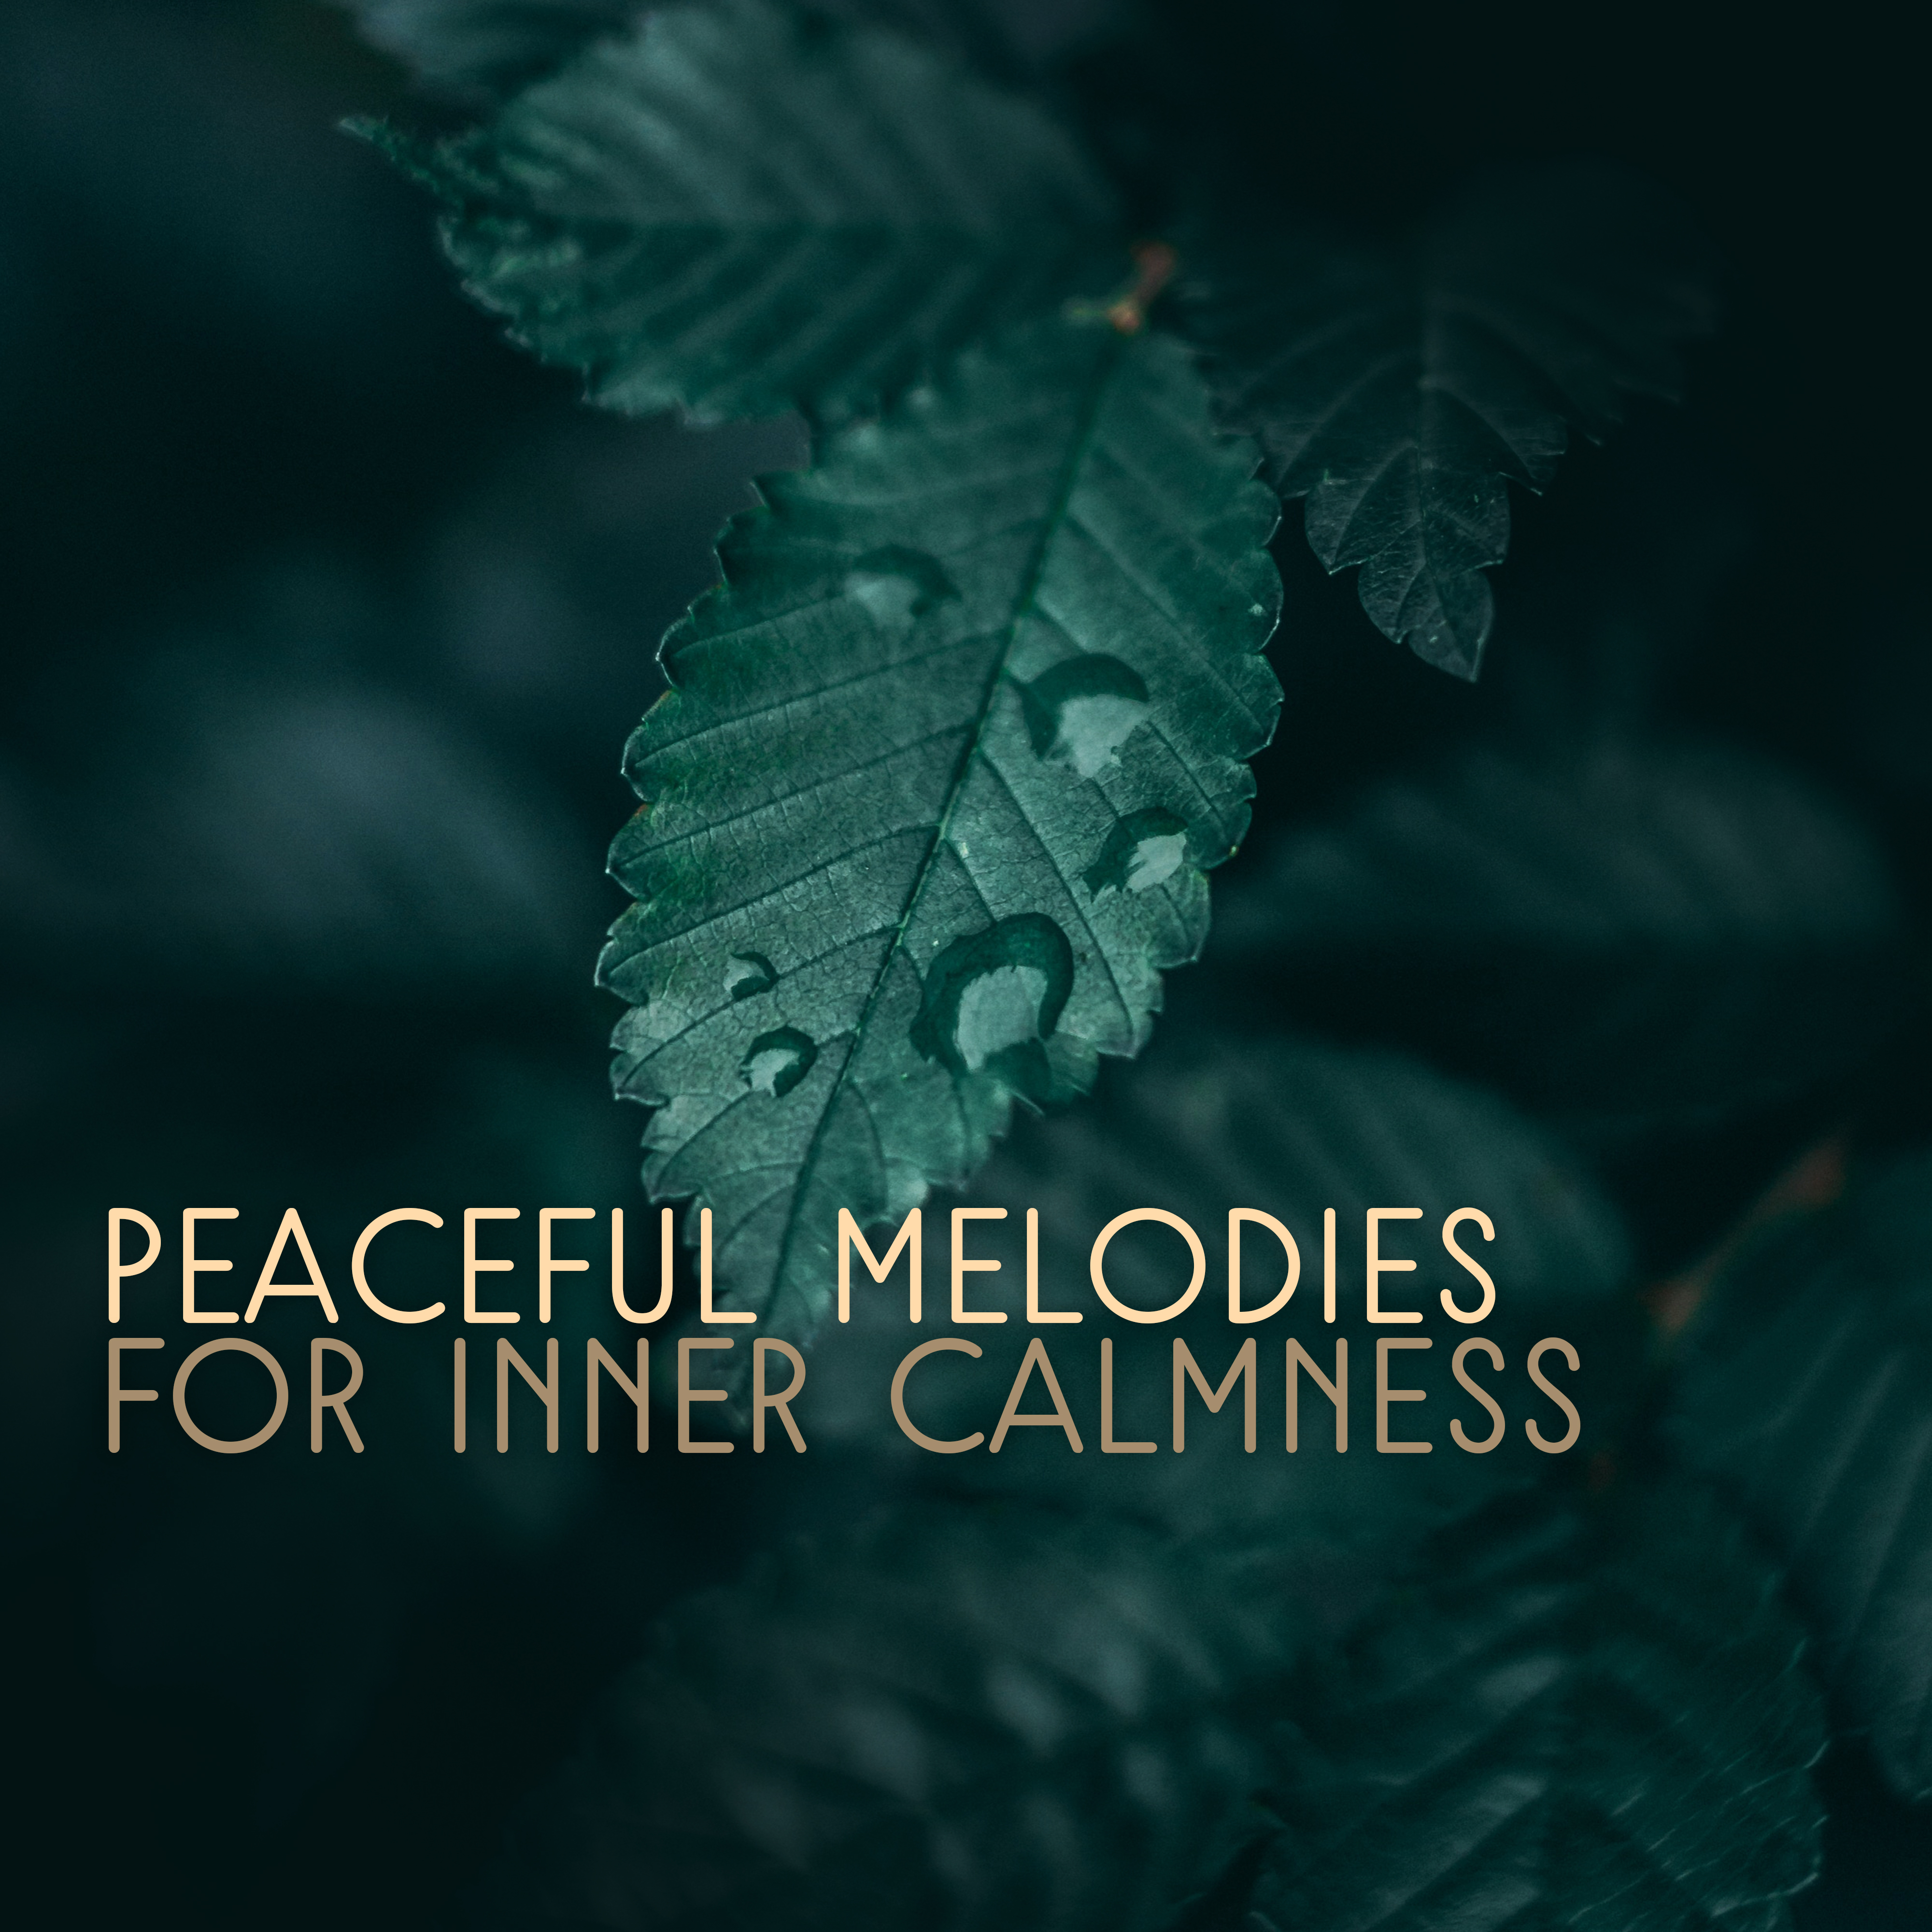 Peaceful Melodies for Inner Calmness